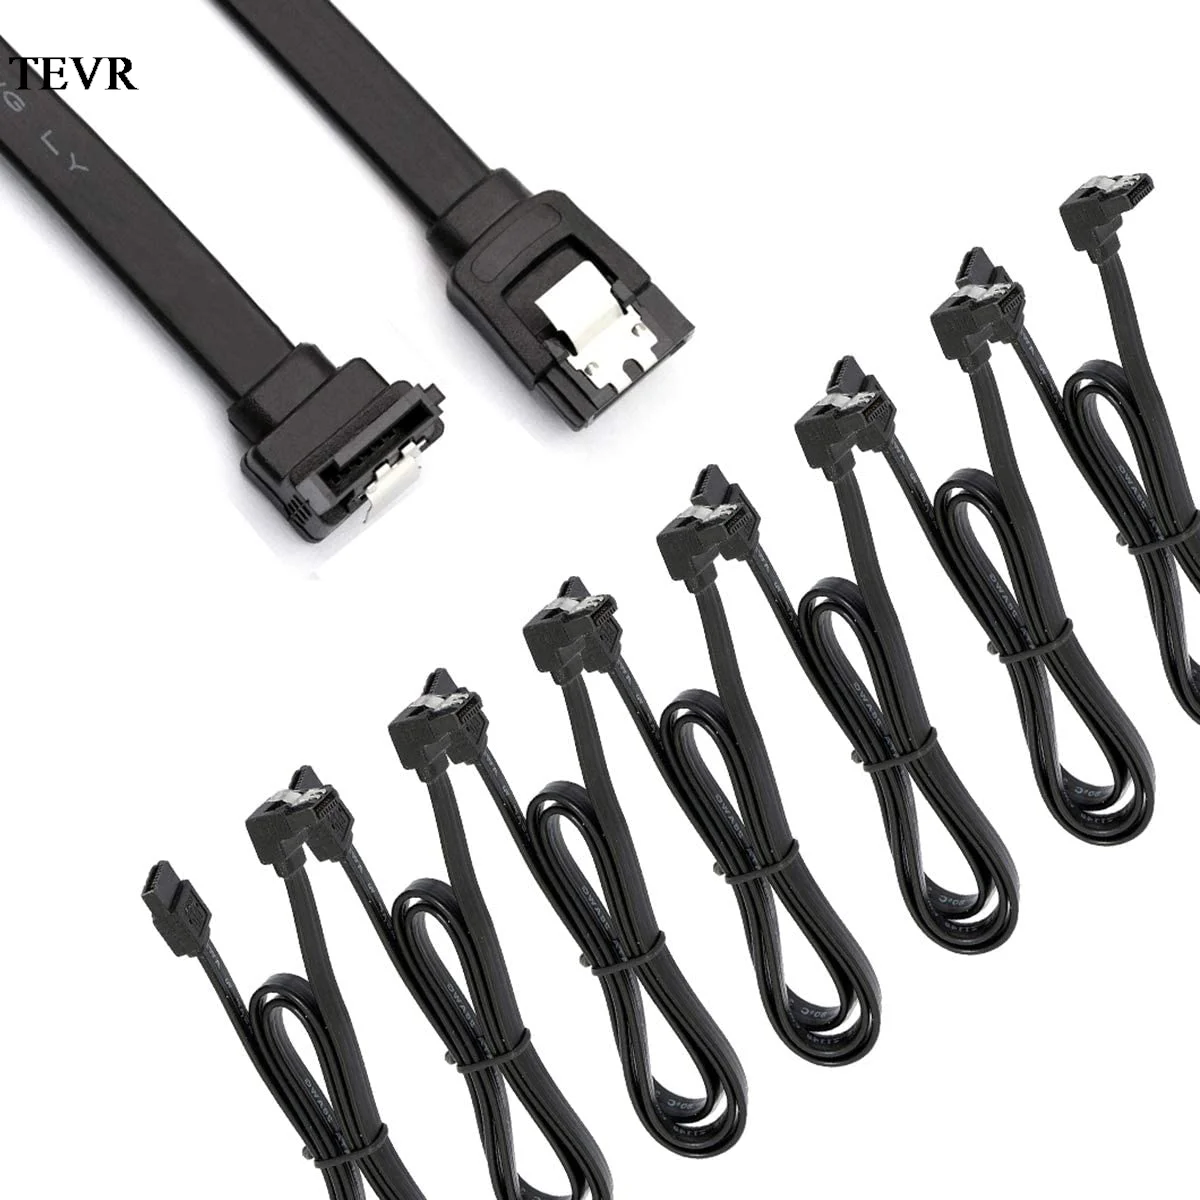 

12 Pack 90 Degree Right-Angle Straight SATA III HDD SDD Data Cable 16 Inch 6.0 Gbps With Locking Latch For SSD, CD Driver,SATA H